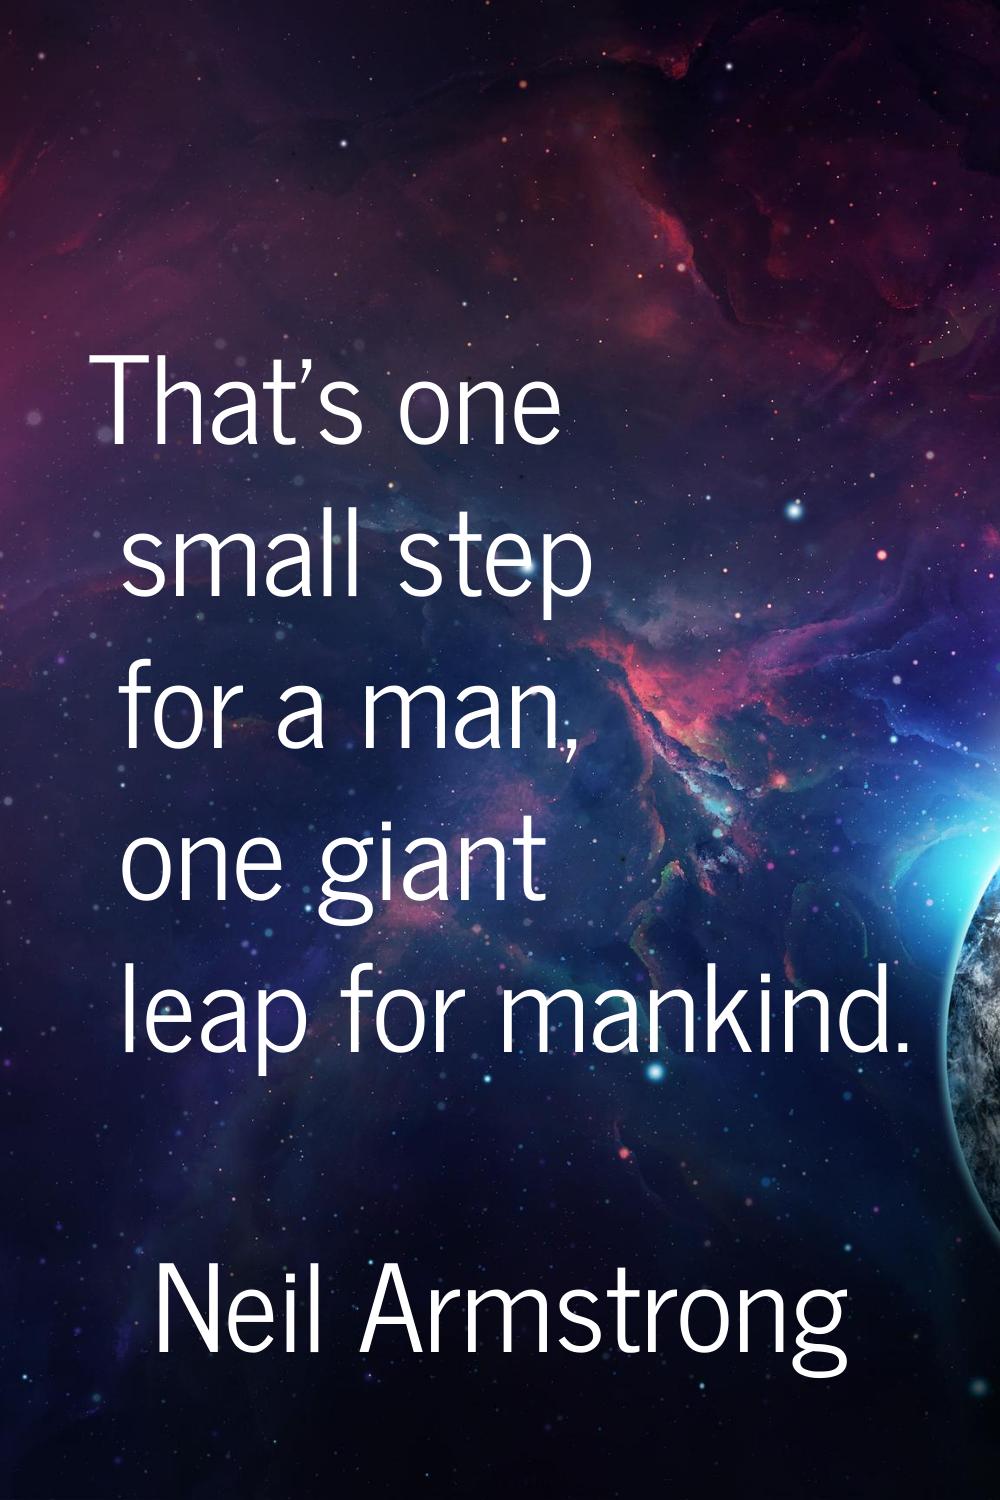 That's one small step for a man, one giant leap for mankind.